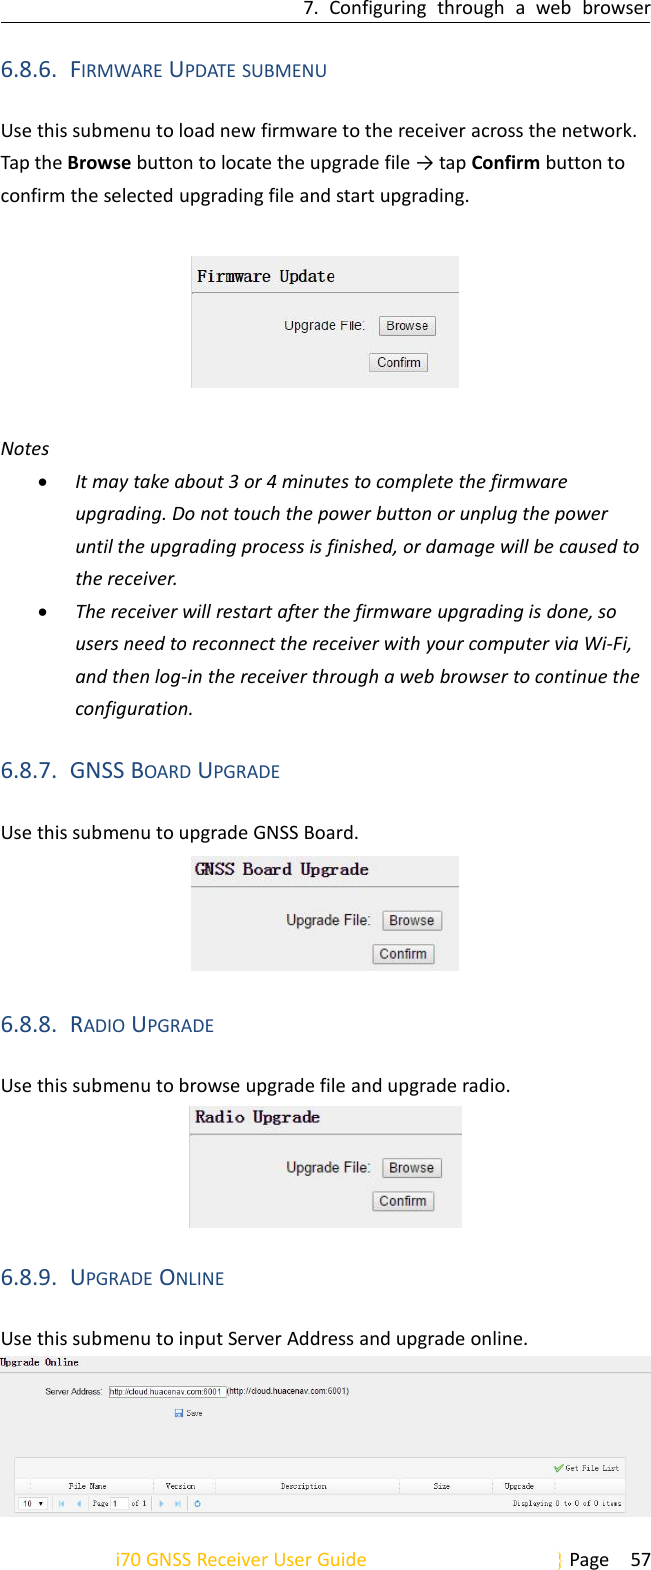 7. Configuring through a web browseri70 GNSS Receiver User Guide Page 576.8.6. FIRMWARE UPDATE SUBMENUUse this submenu to load new firmware to the receiver across the network.Tap the Browse button to locate the upgrade file → tap Confirm button toconfirm the selected upgrading file and start upgrading.NotesIt may take about 3 or 4 minutes to complete the firmwareupgrading. Do not touch the power button or unplug the poweruntil the upgrading process is finished, or damage will be caused tothe receiver.The receiver will restart after the firmware upgrading is done, sousers need to reconnect the receiver with your computer via Wi-Fi,and then log-in the receiver through a web browser to continue theconfiguration.6.8.7. GNSS BOARD UPGRADEUse this submenu to upgrade GNSS Board.6.8.8. RADIO UPGRADEUse this submenu to browse upgrade file and upgrade radio.6.8.9. UPGRADE ONLINEUse this submenu to input Server Address and upgrade online.